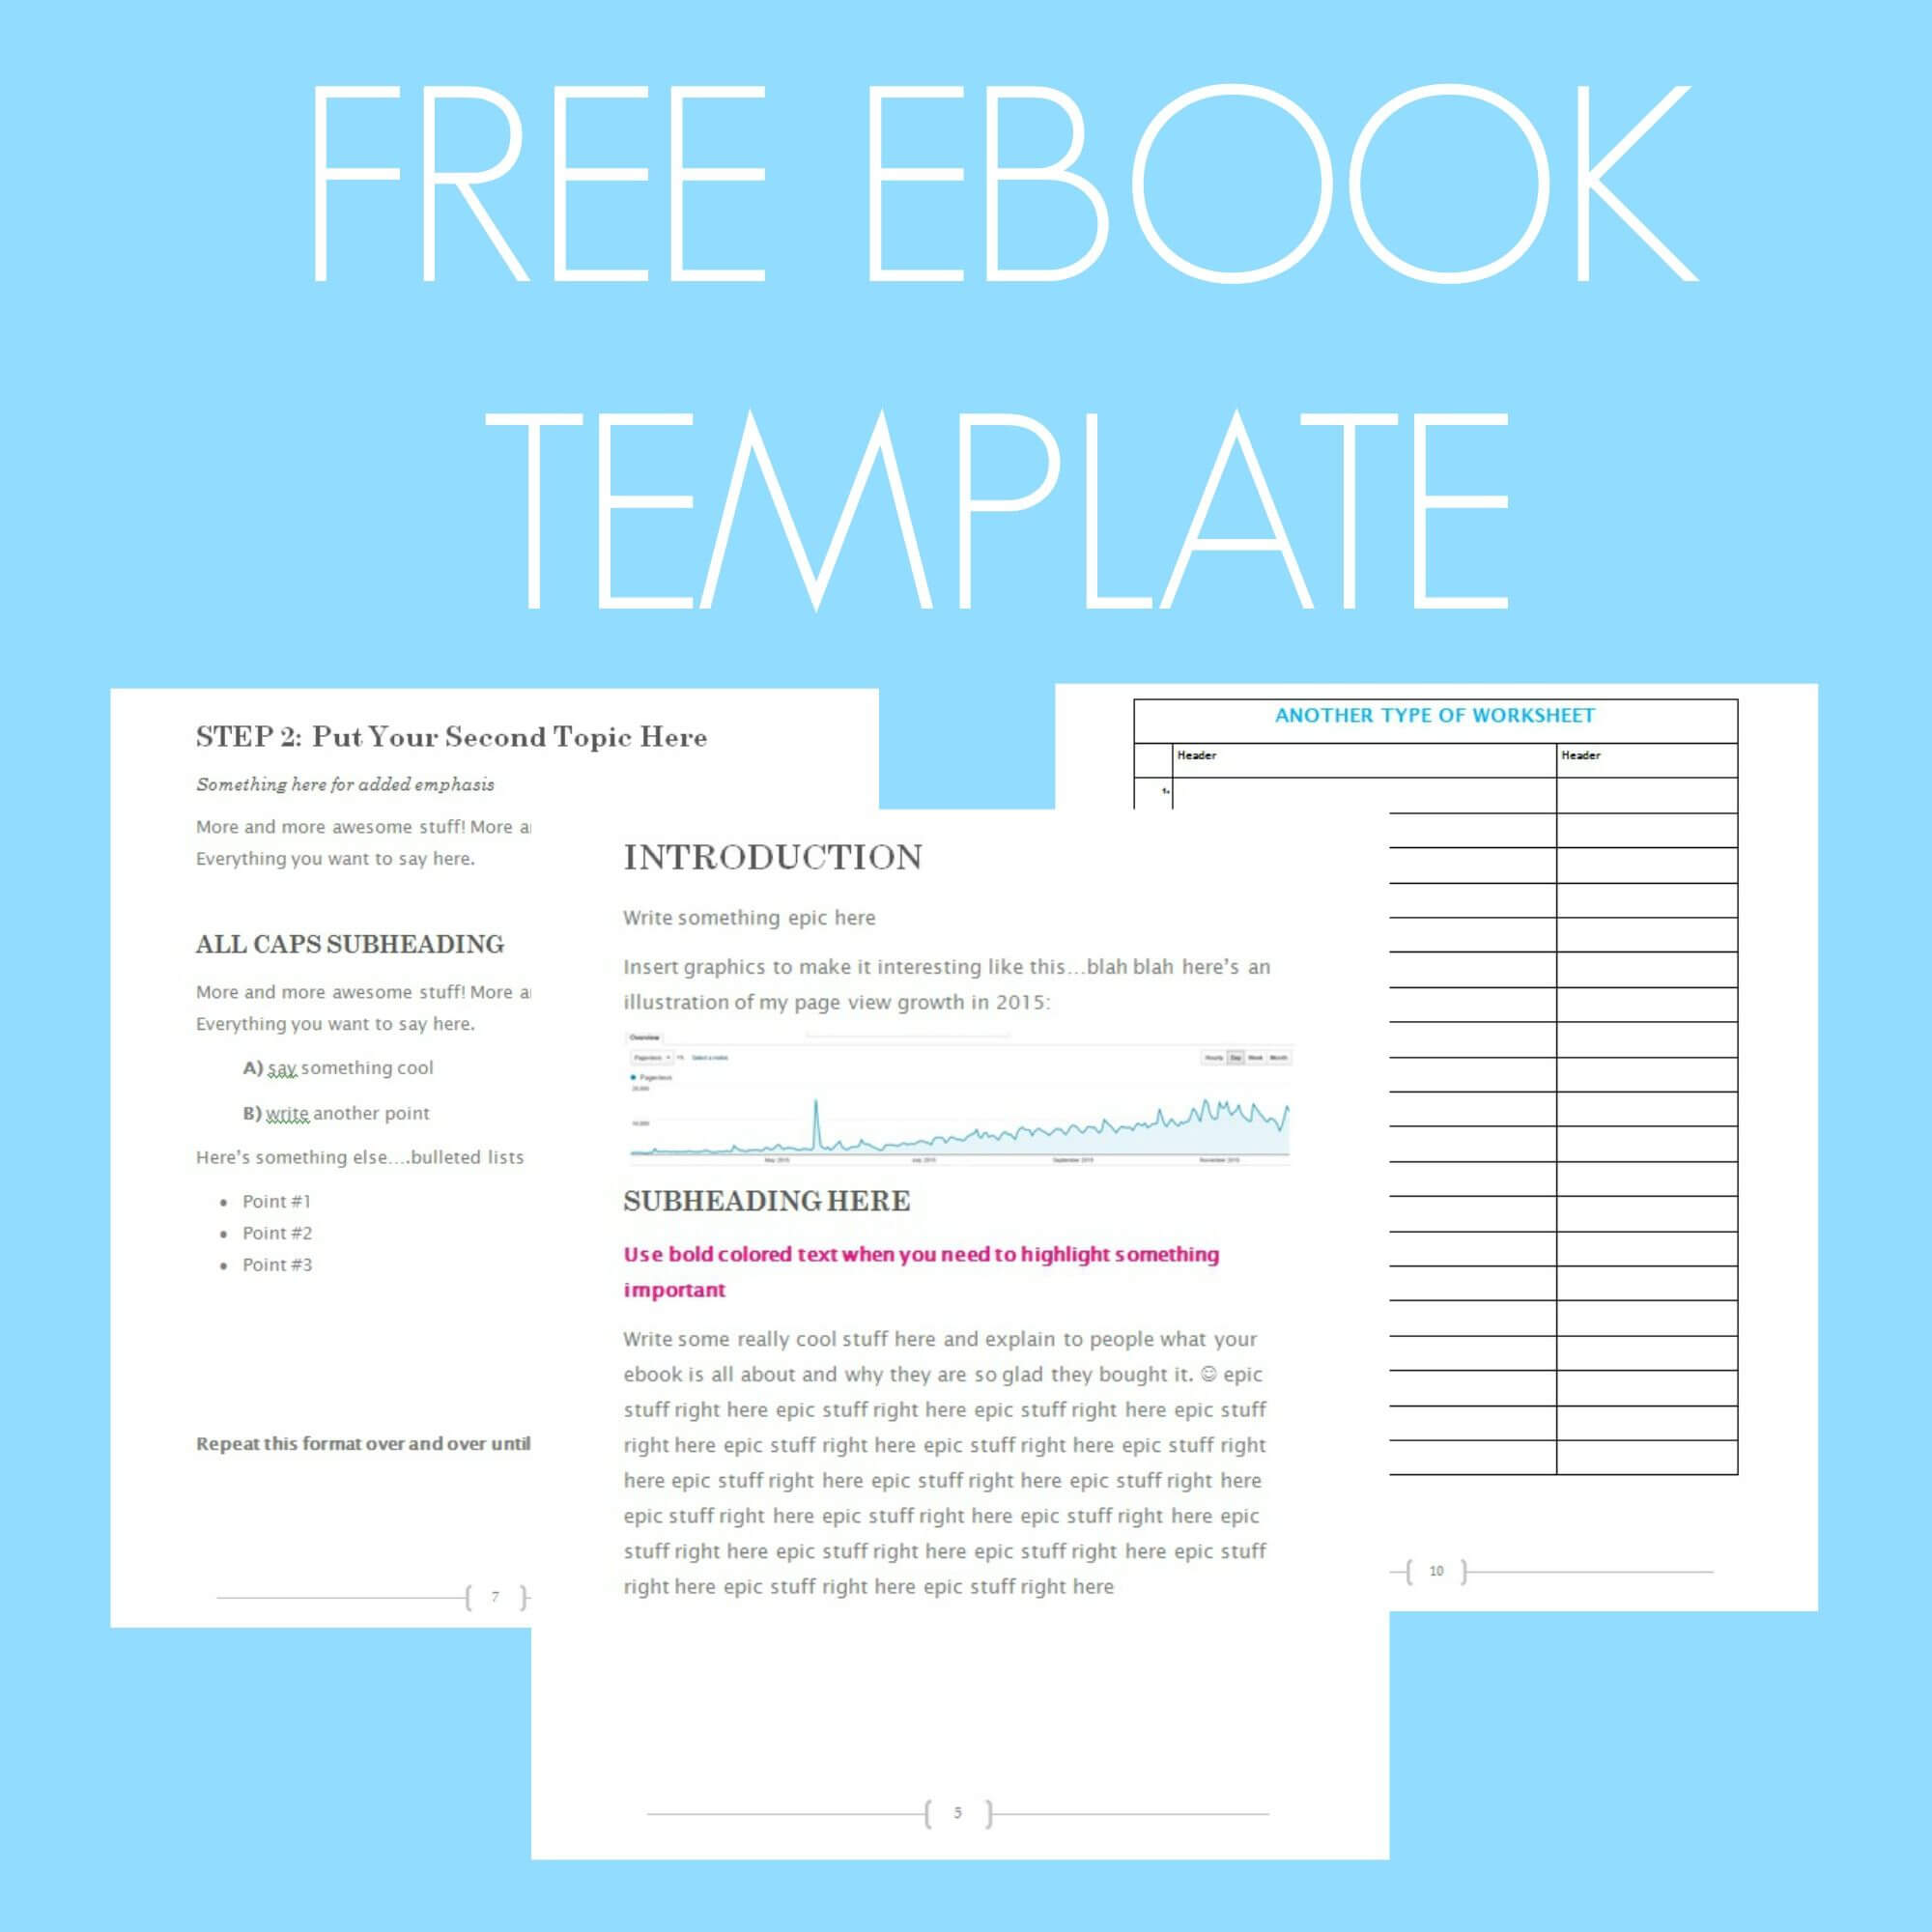 Free Ebook Template – Preformatted Word Document | Free Regarding Another Word For Template